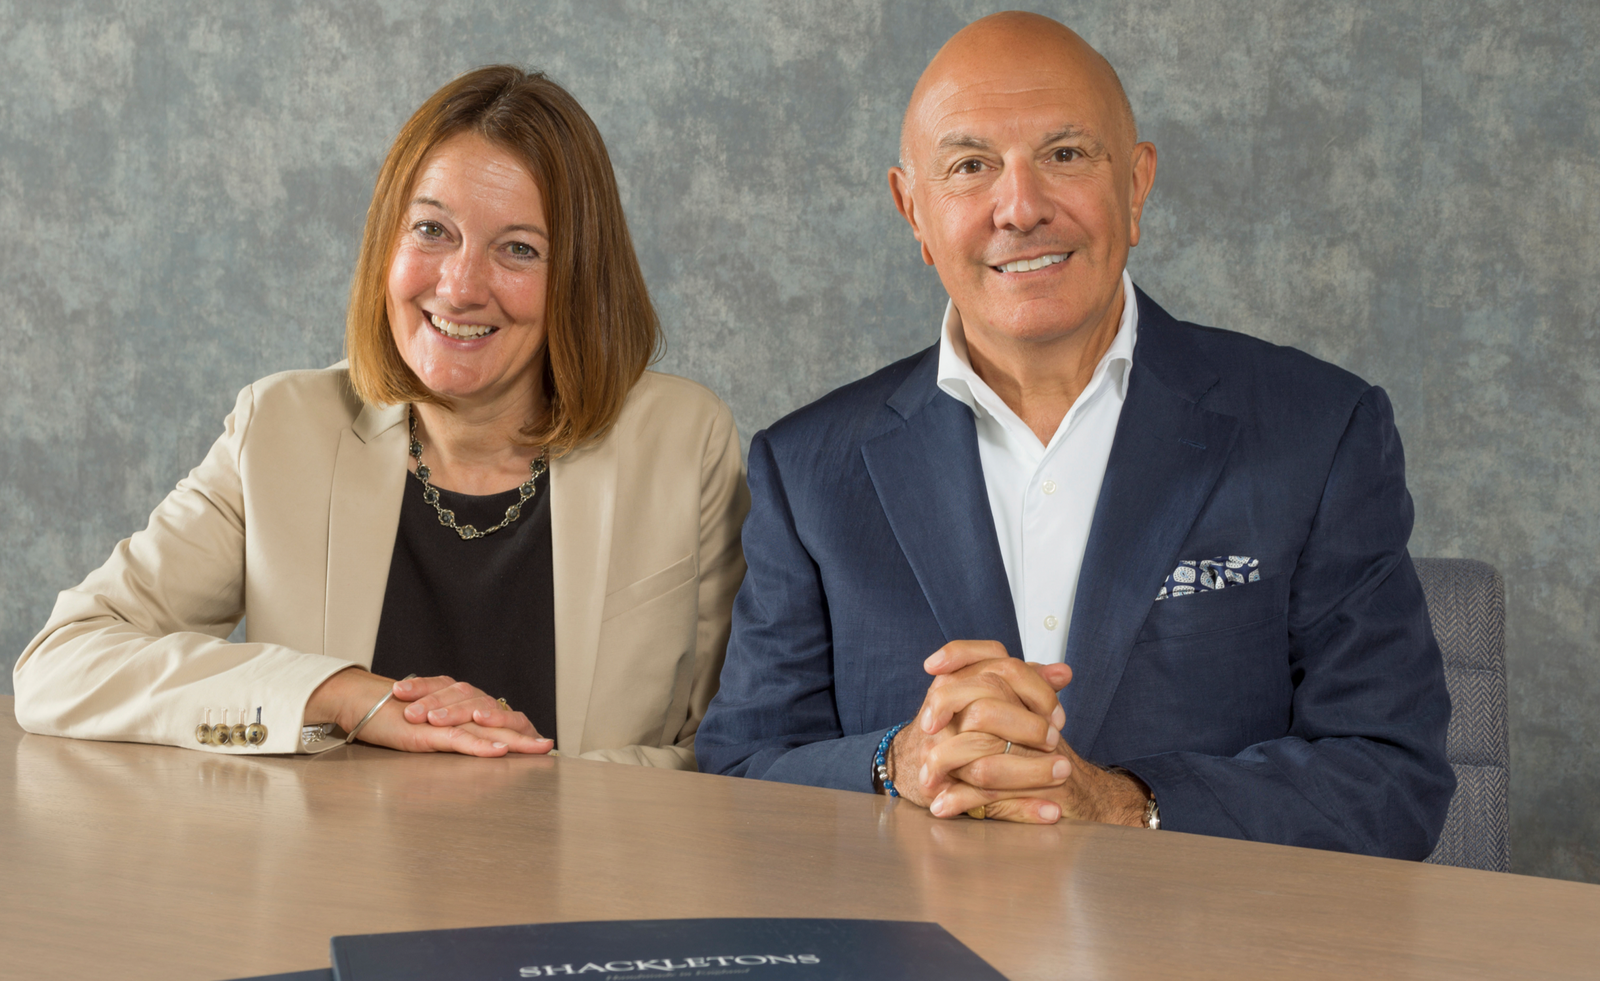 Shackletons appoints new CEO to manage growth